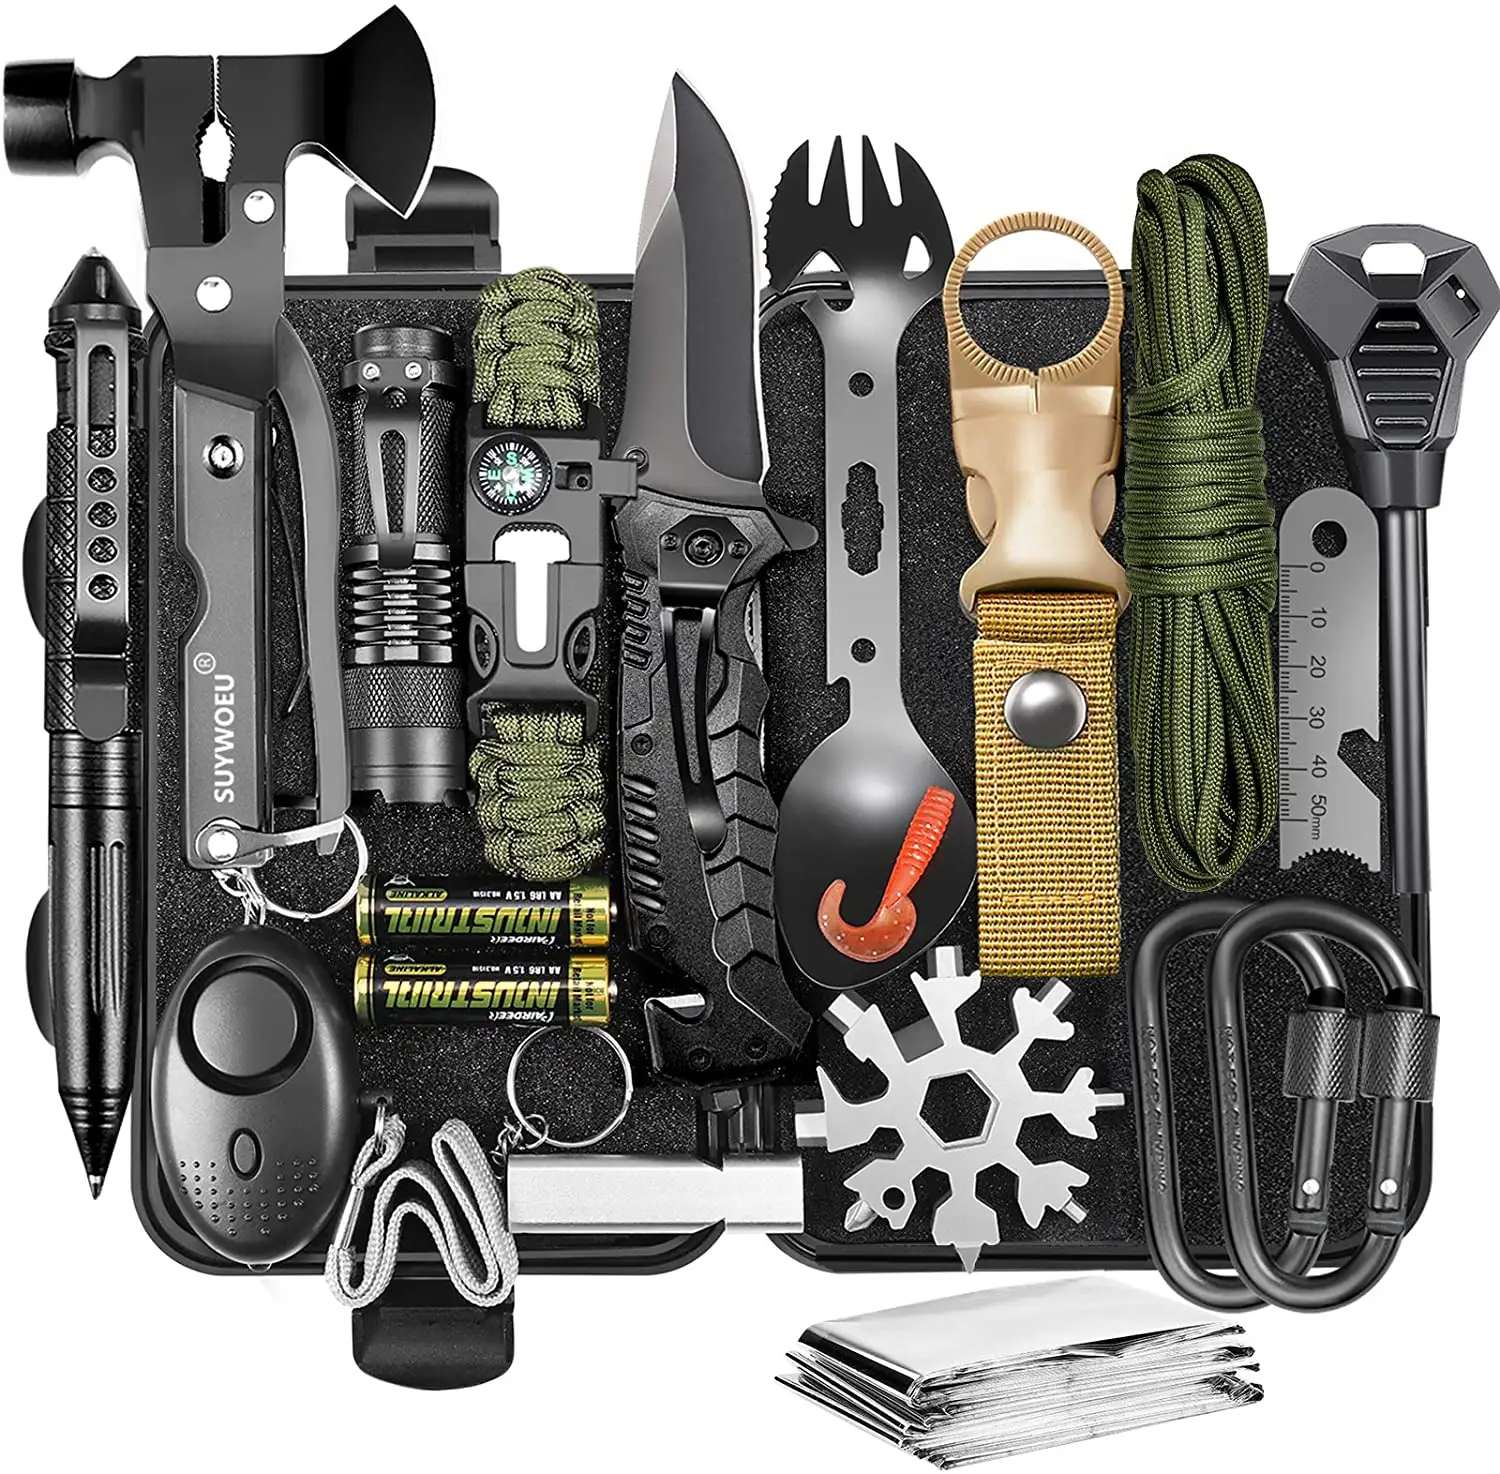 Survival Gear and Equipment kit 20 in 1 Professional Cool Gadgets Stuff Tactical Tool